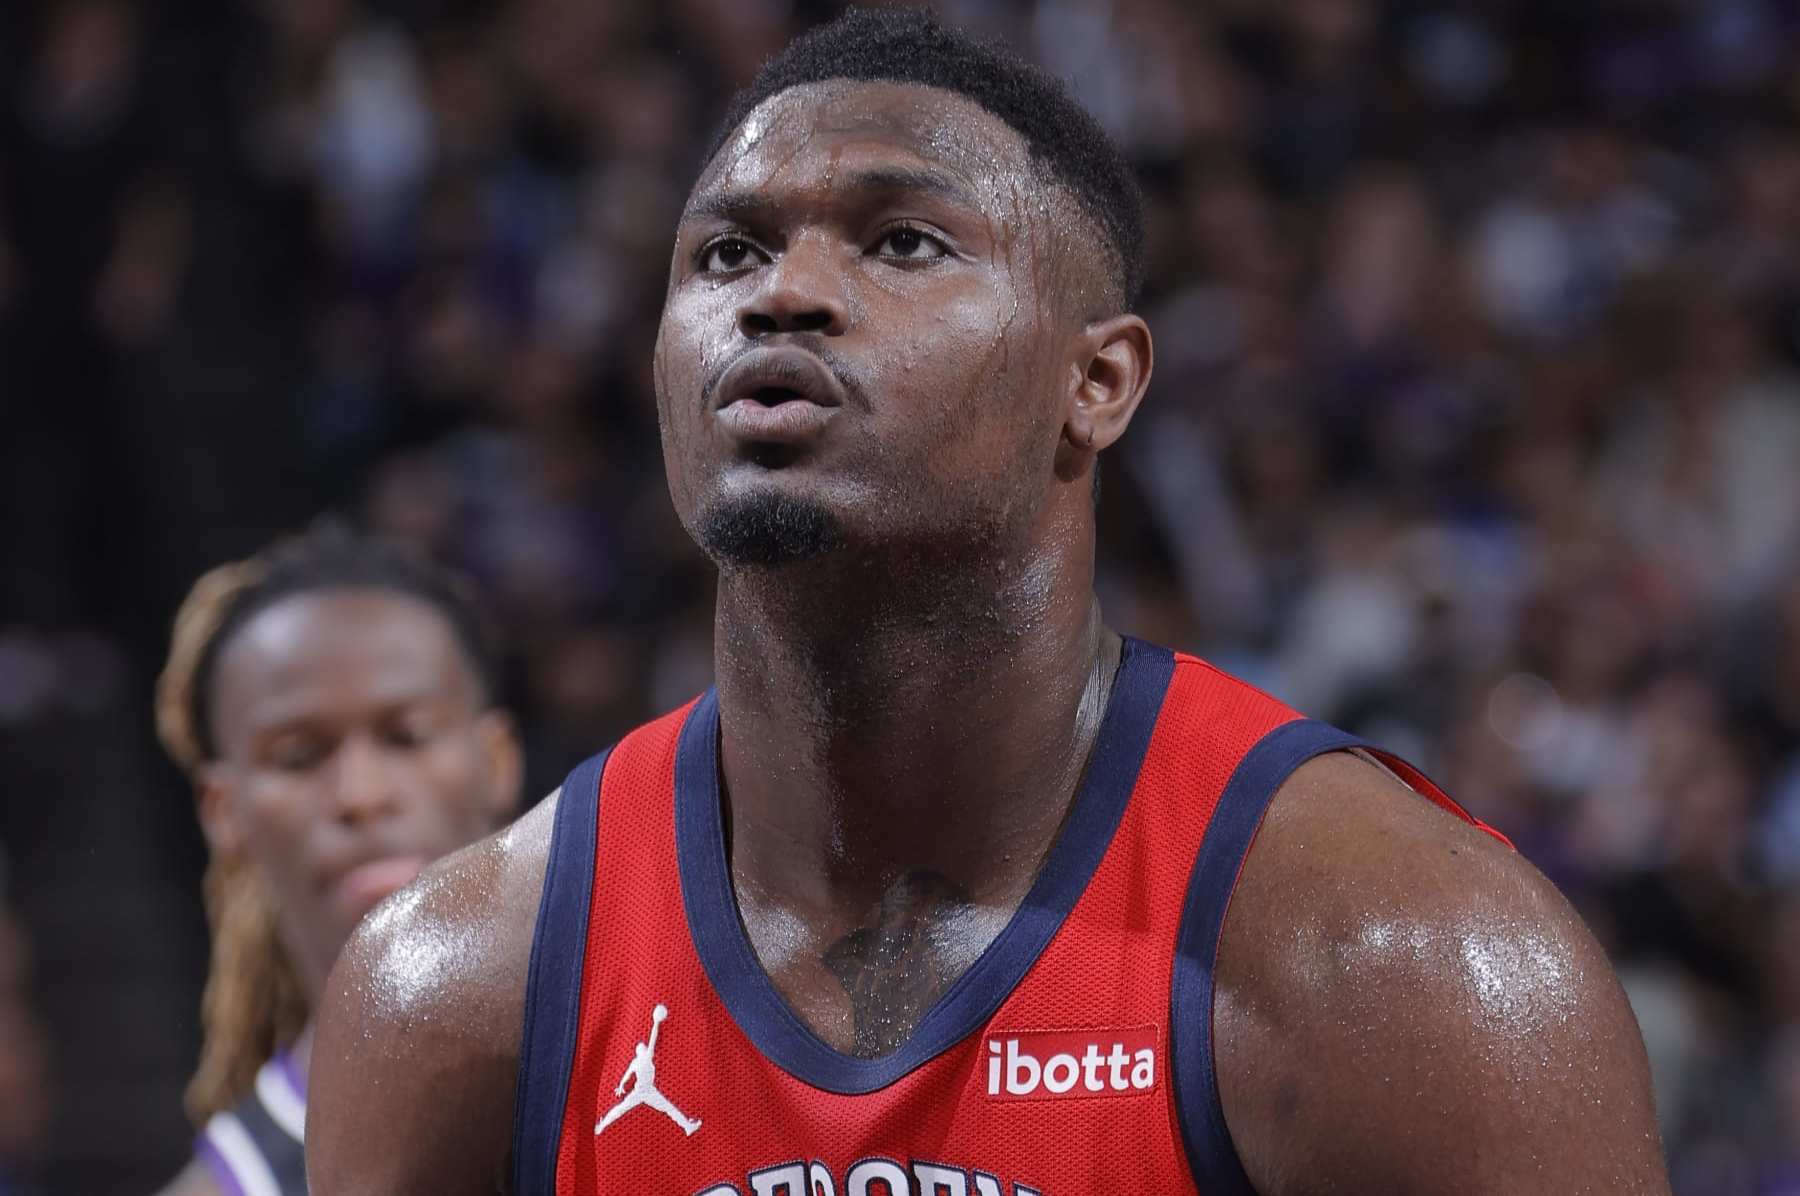 Zion Williamson Demonstrates Strength and Resilience by Playing Through Injury